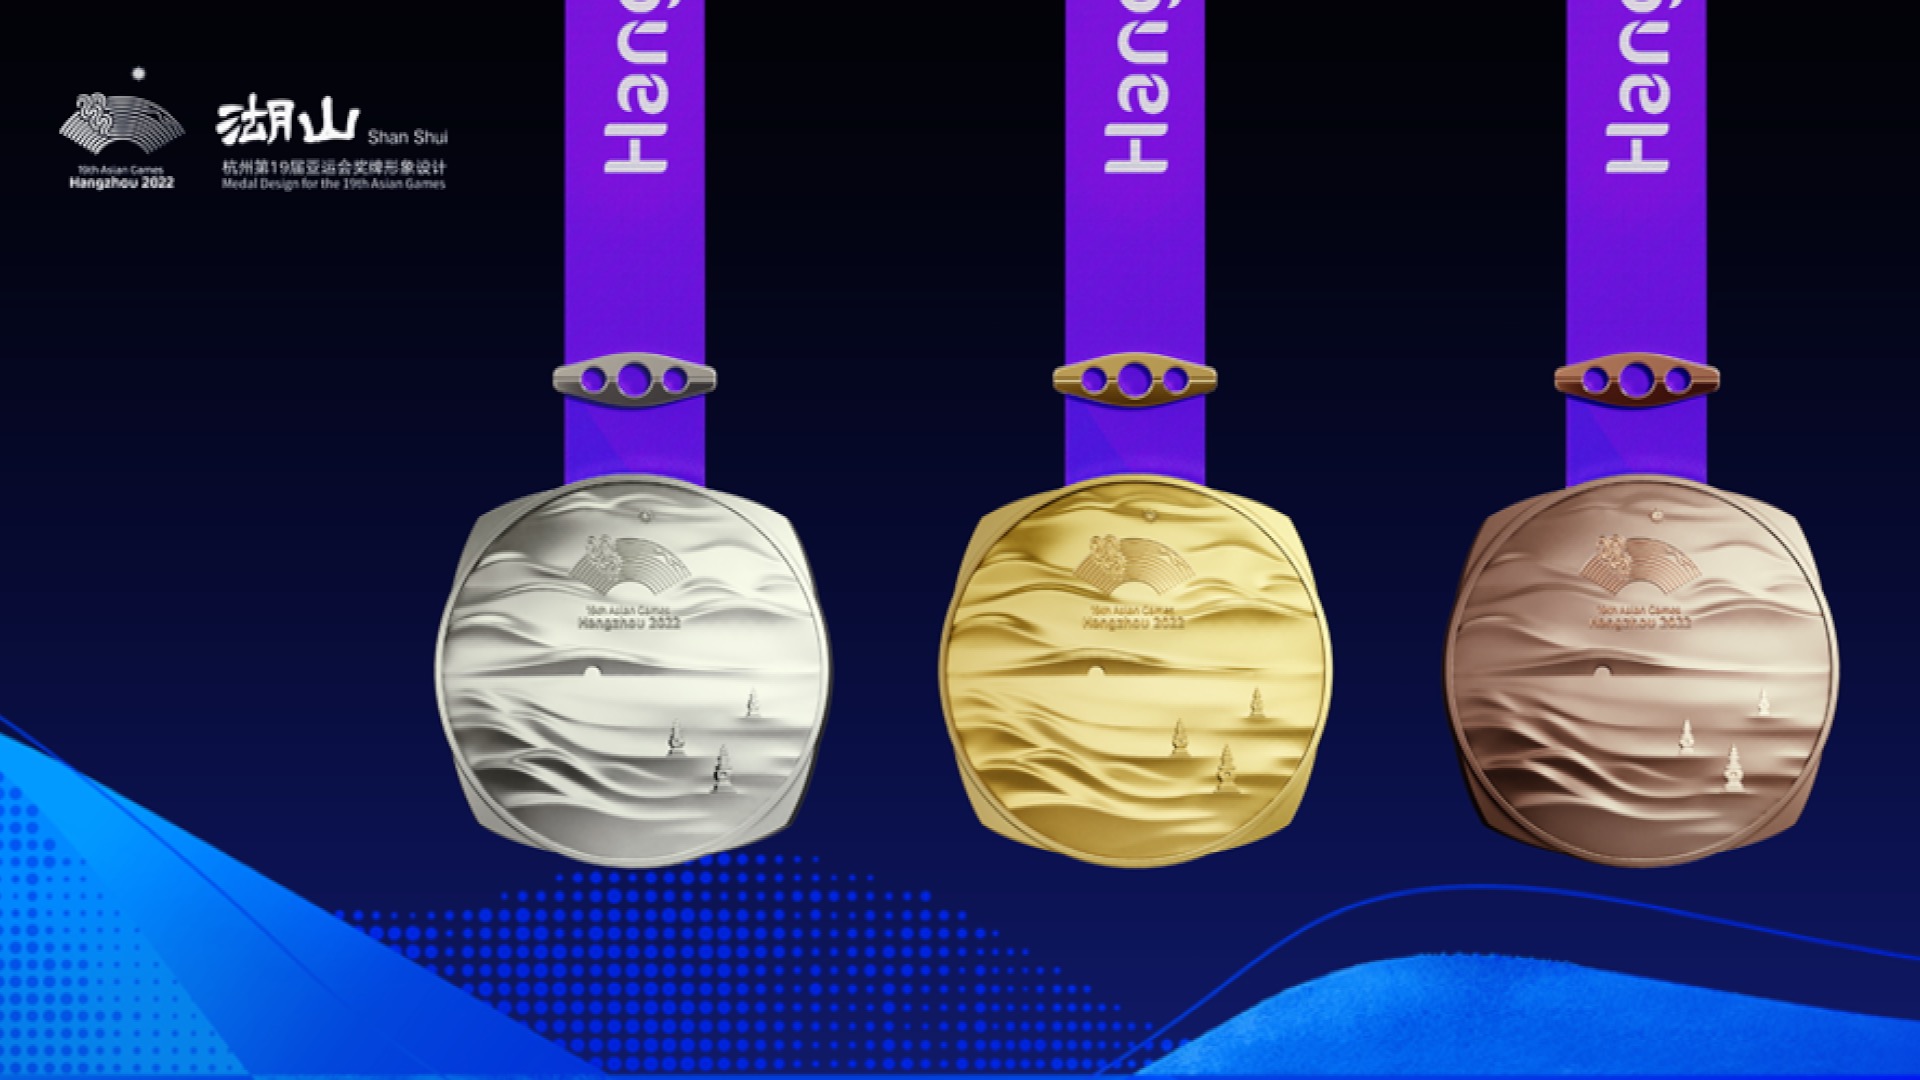 Hangzhou 2022 Asian Games medals unveiled with 100 days to go CGTN